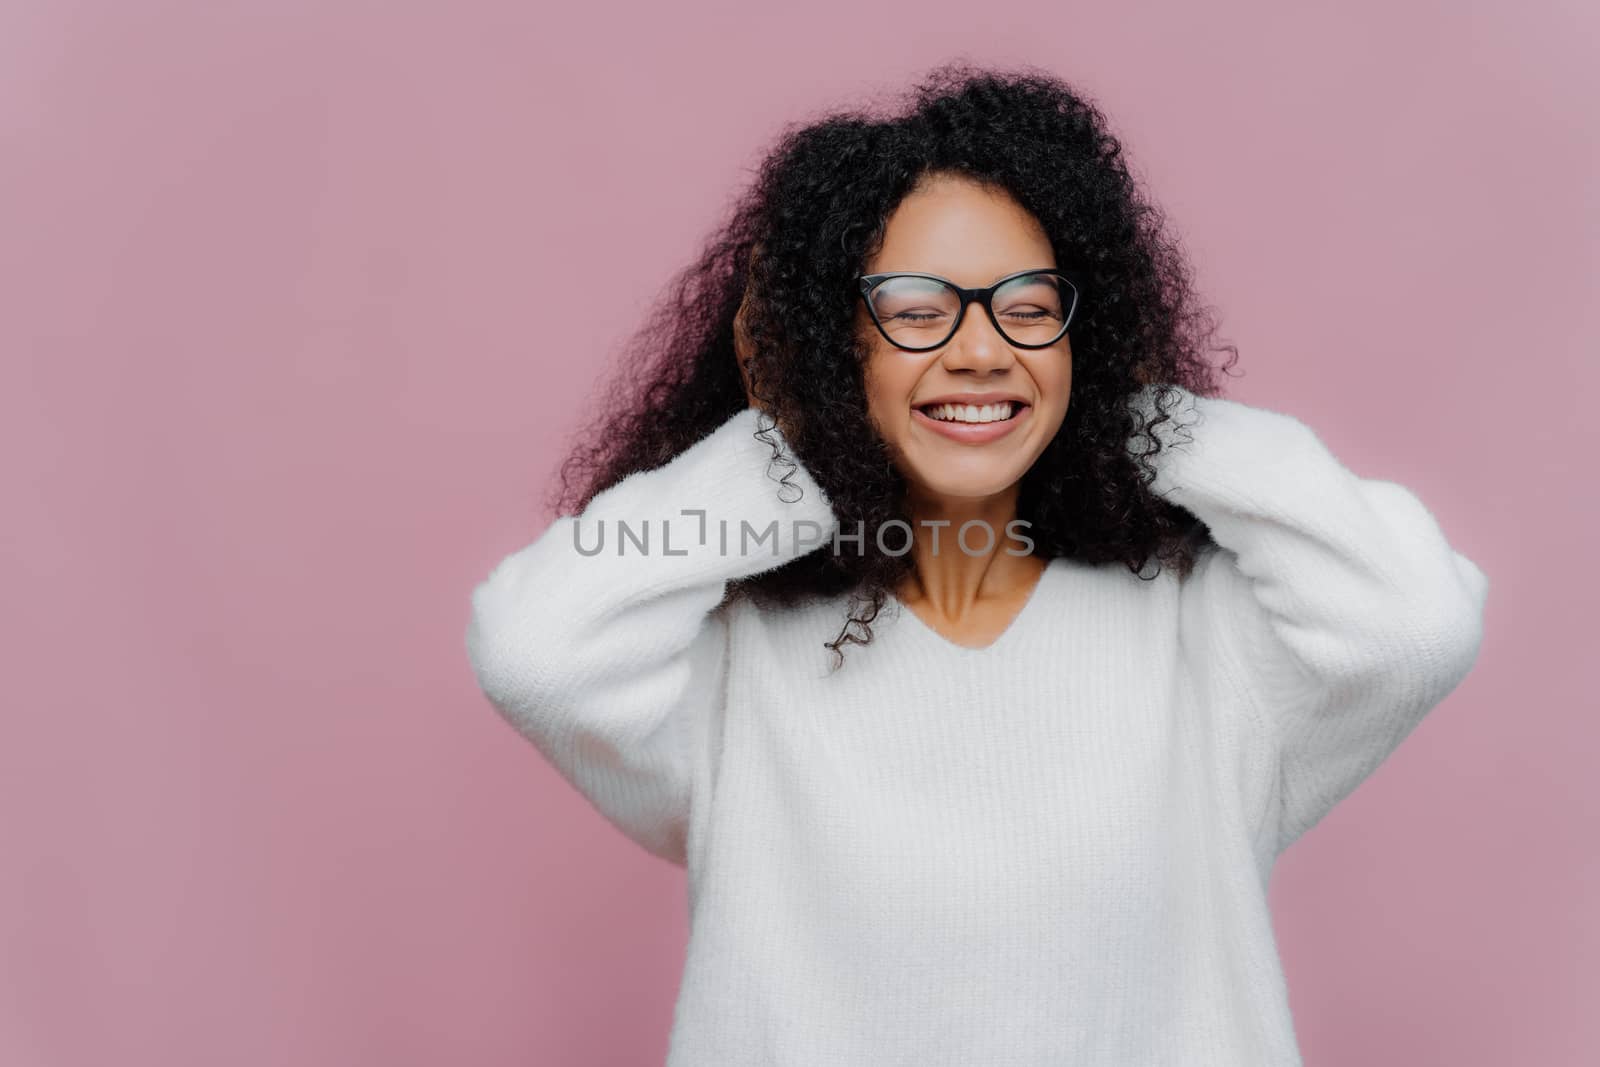 Portrait of joyous pleasant looking African American woman covers both ears with hands, hears loud music, smiles broadly, wears spectacles and white warm sweater, poses indoor, being very emotional by vkstock